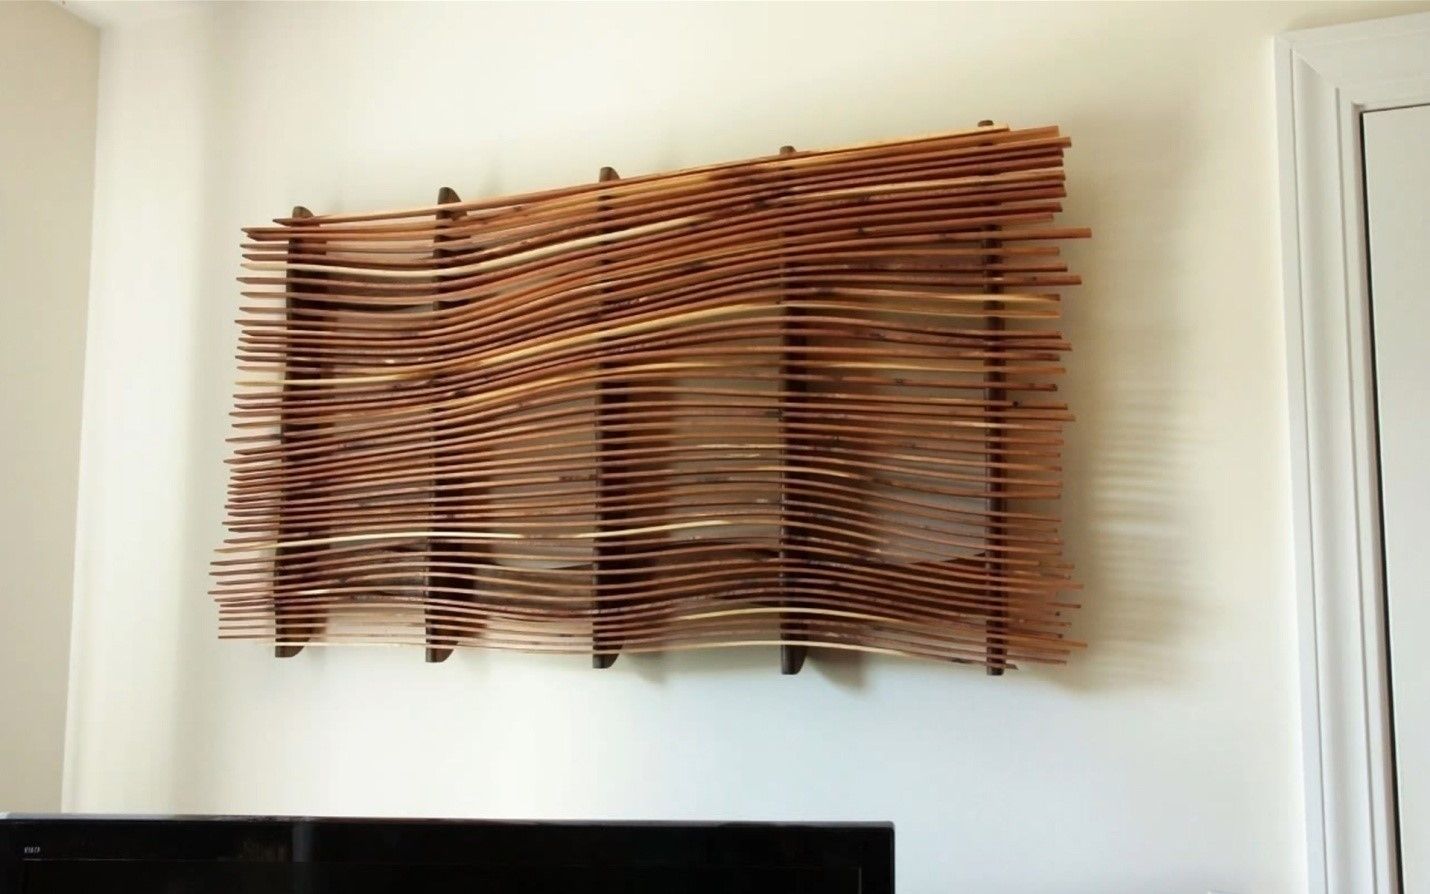 How To Make Wall Art From Scrap Wood | Diy Project – Cut The Wood In Diy Wood Wall Art (View 6 of 20)